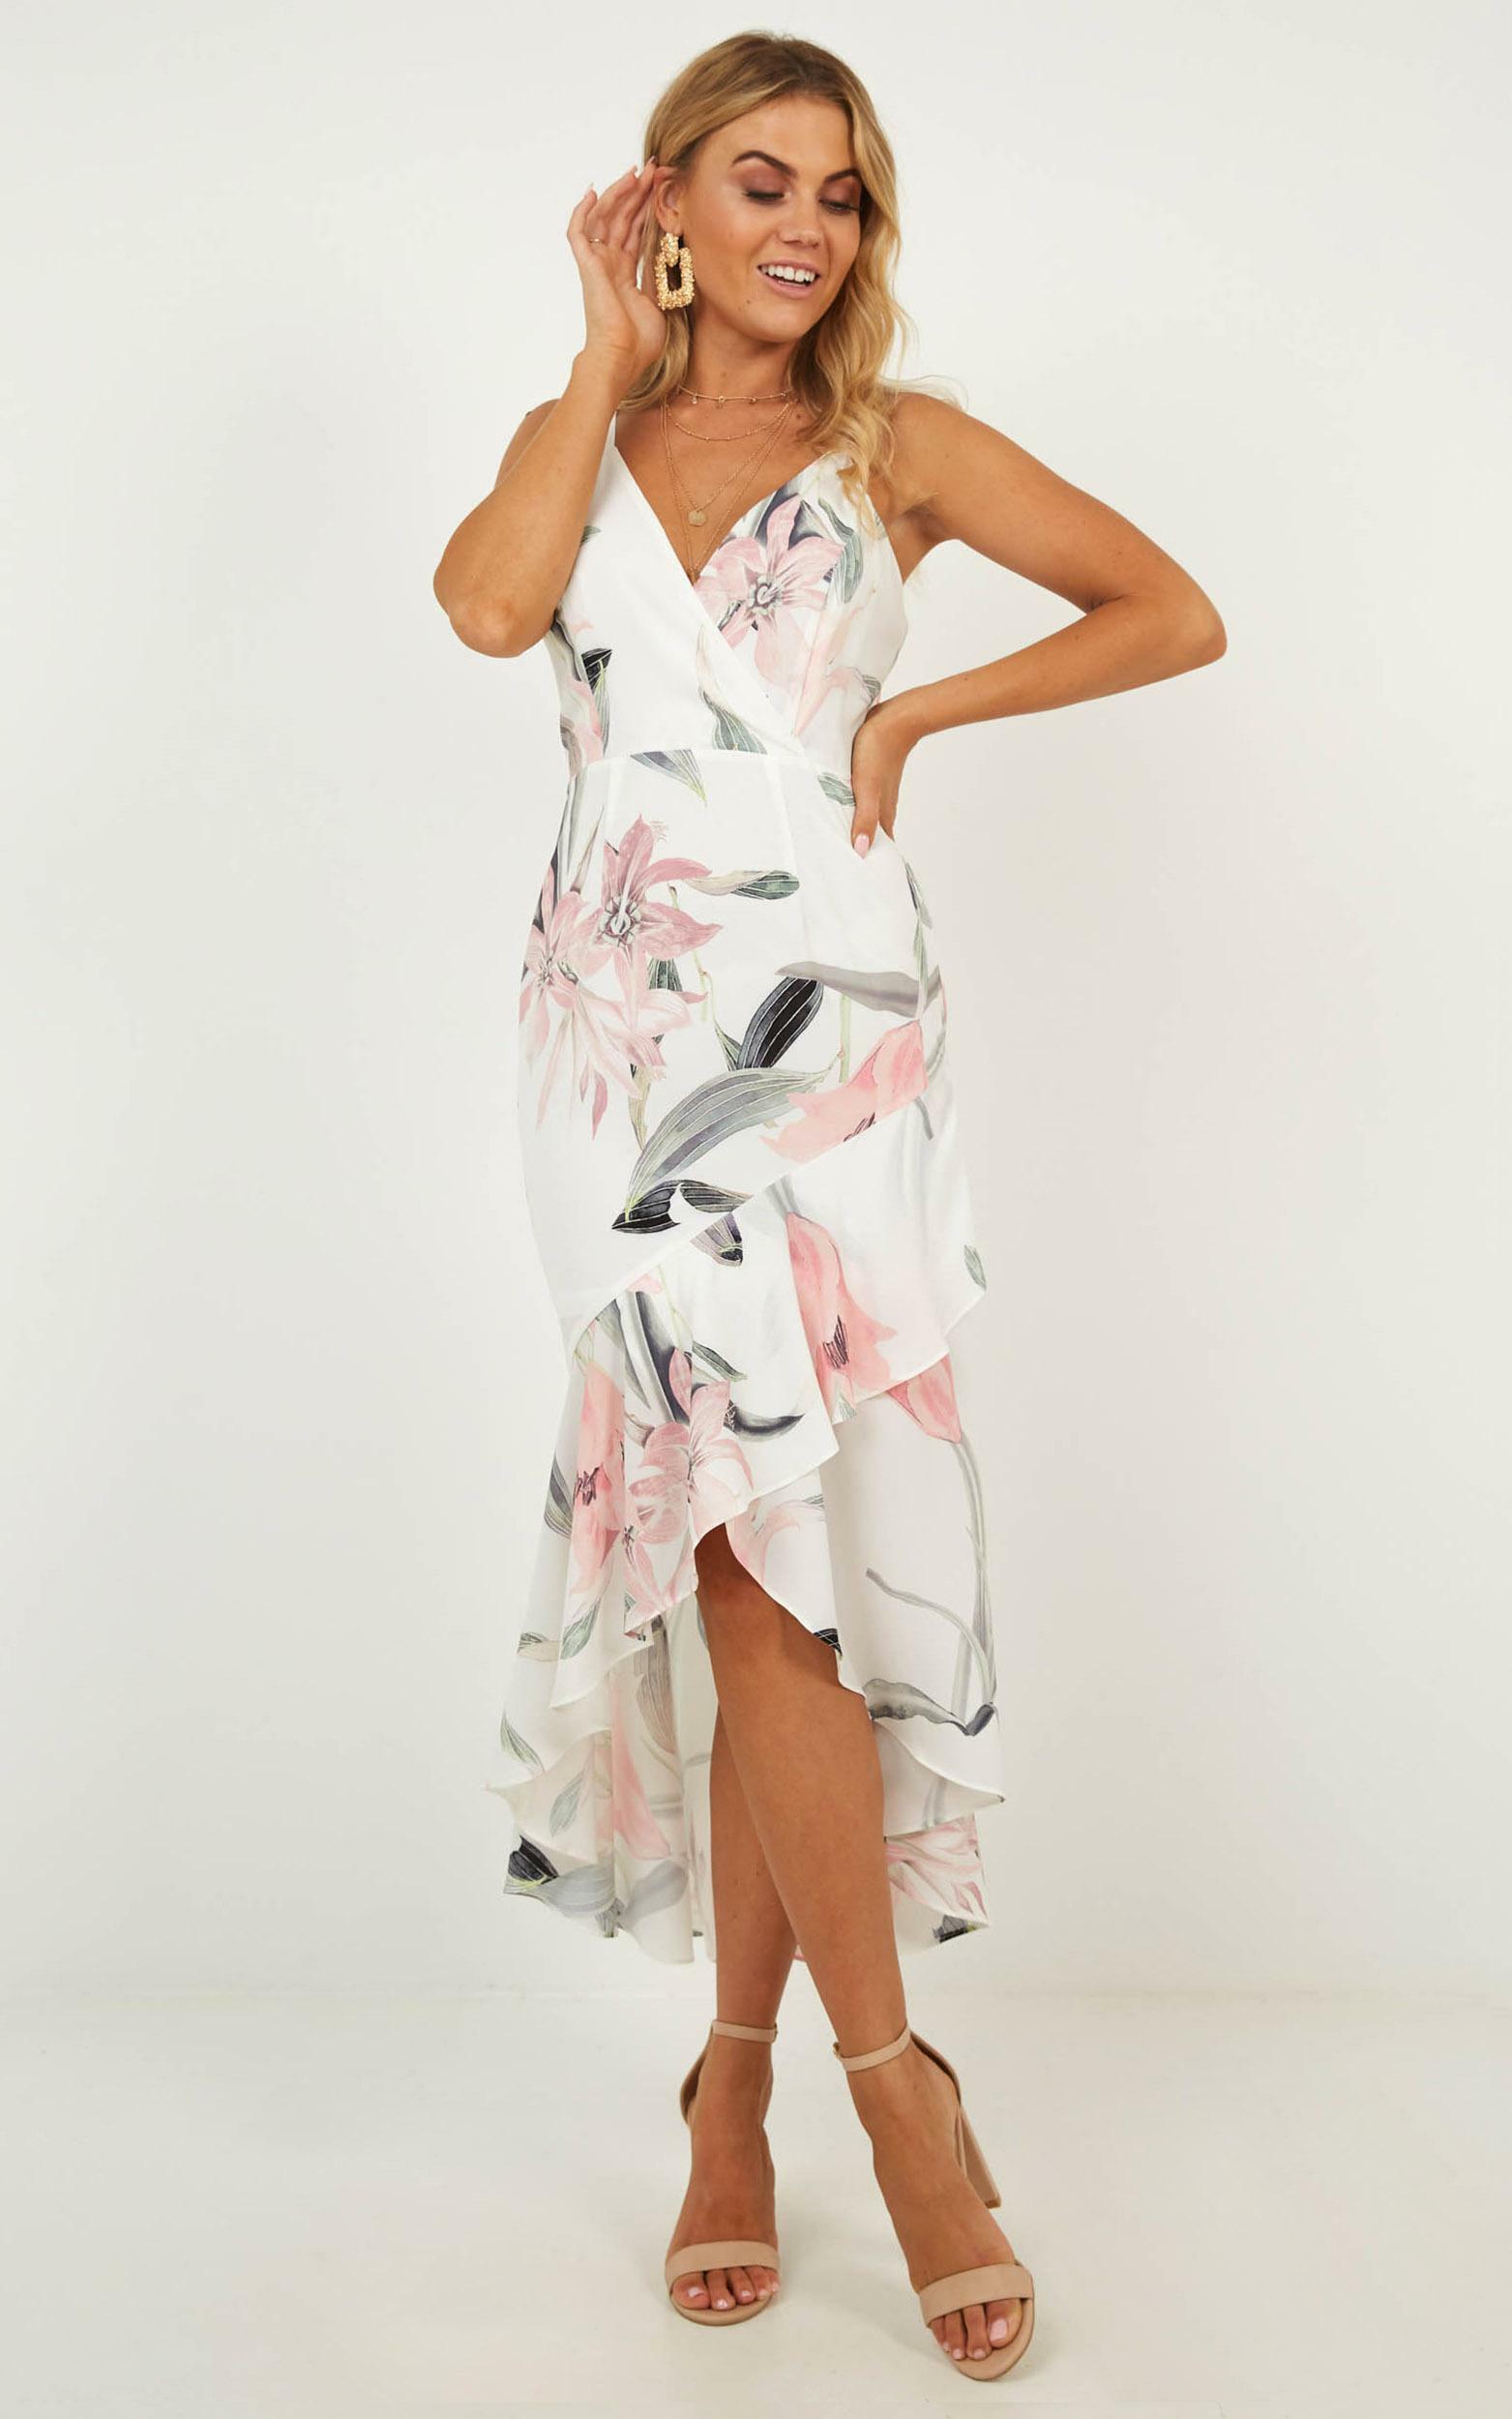 Catch My Stare Dress in white floral - 14 (XL), White, hi-res image number null